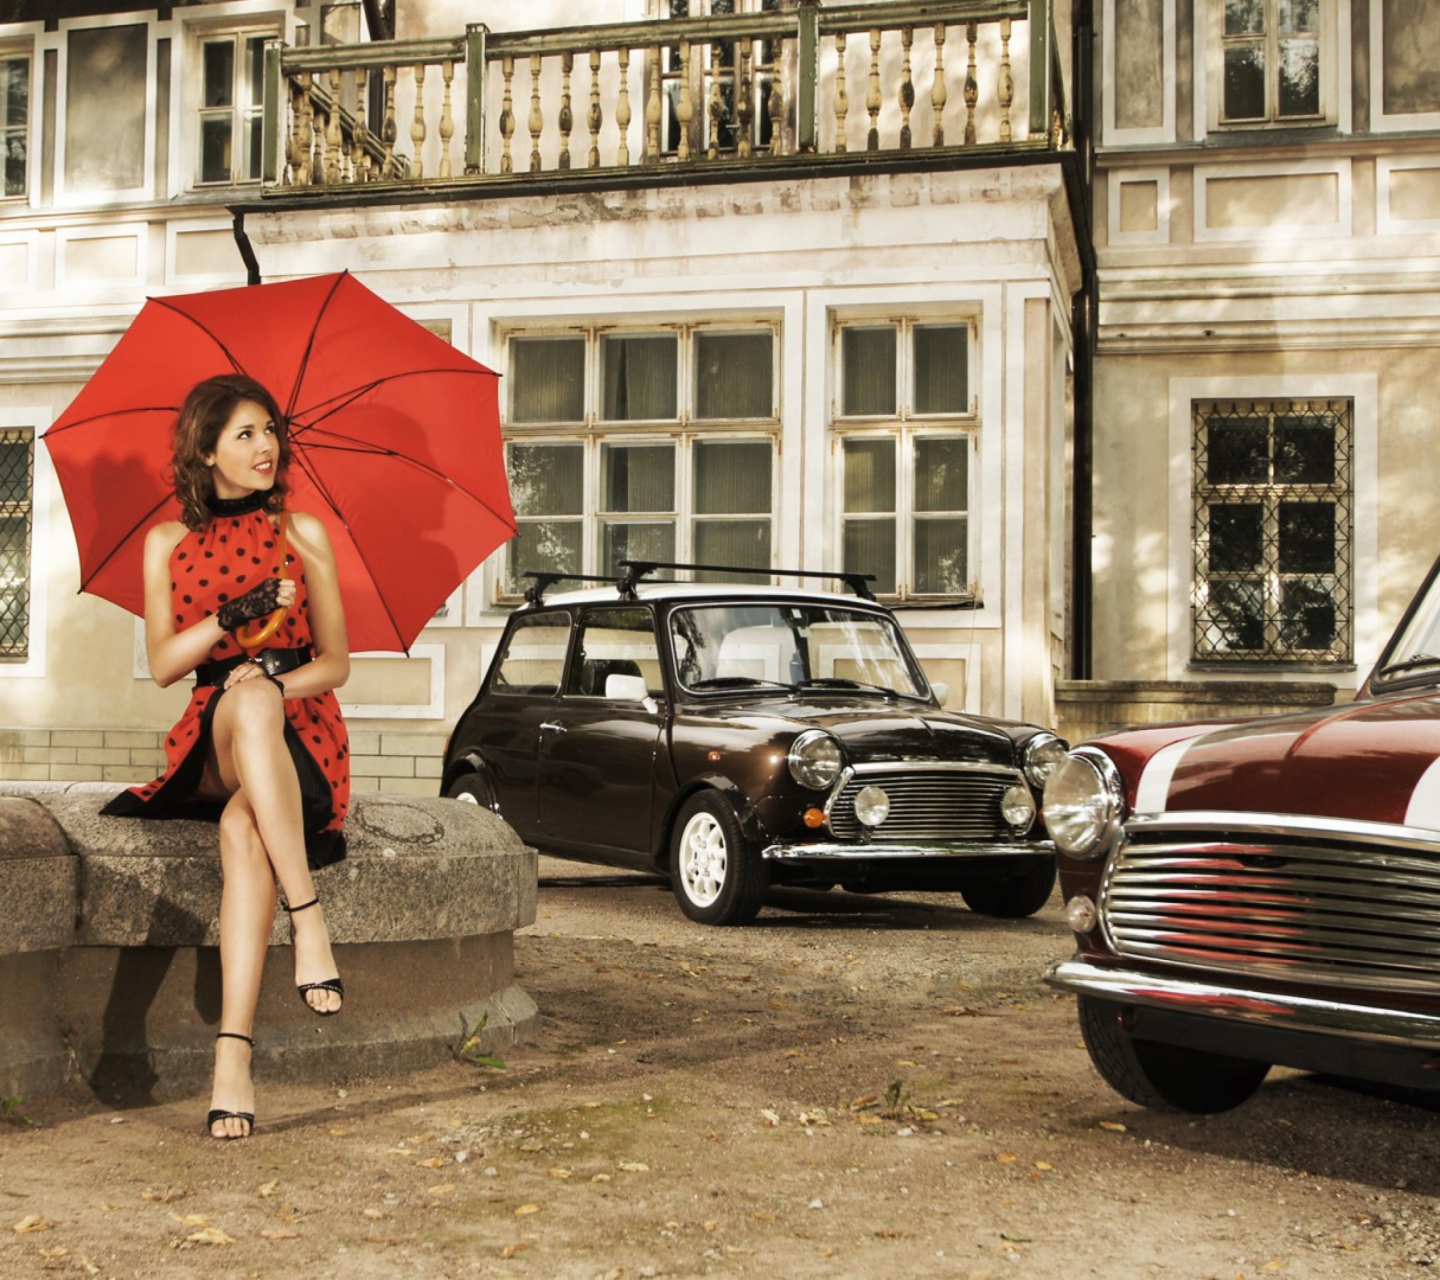 Girl With Red Umbrella And Vintage Mini Cooper screenshot #1 1440x1280